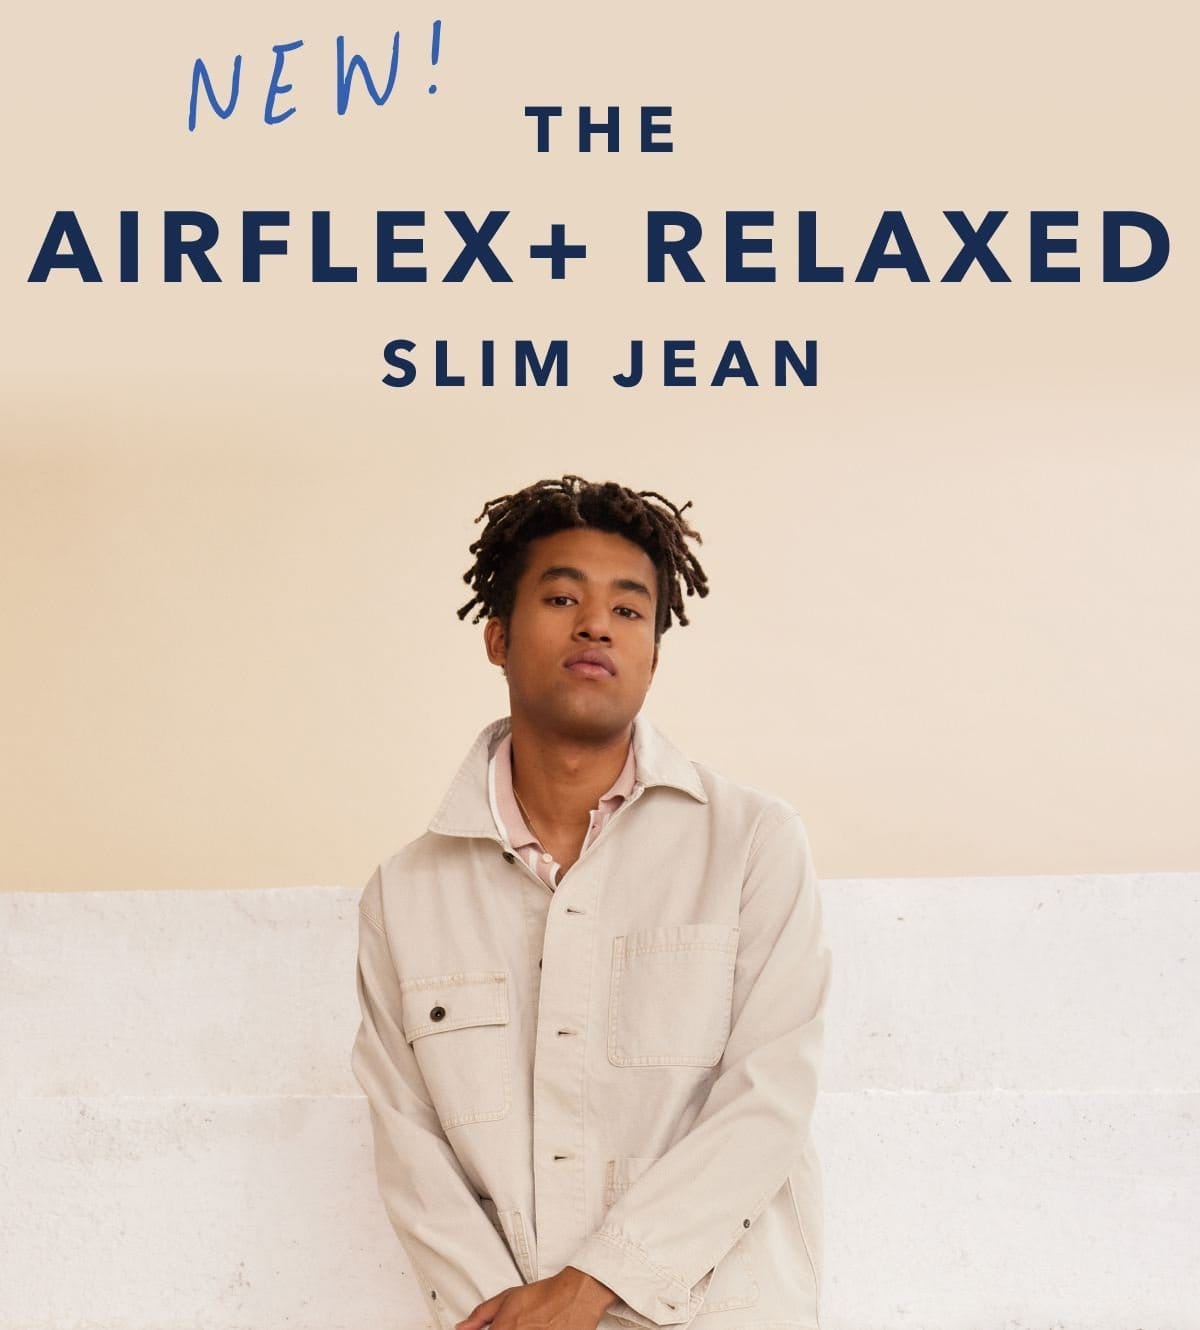 New! The AirFlex+ Relaxed Slim Jean